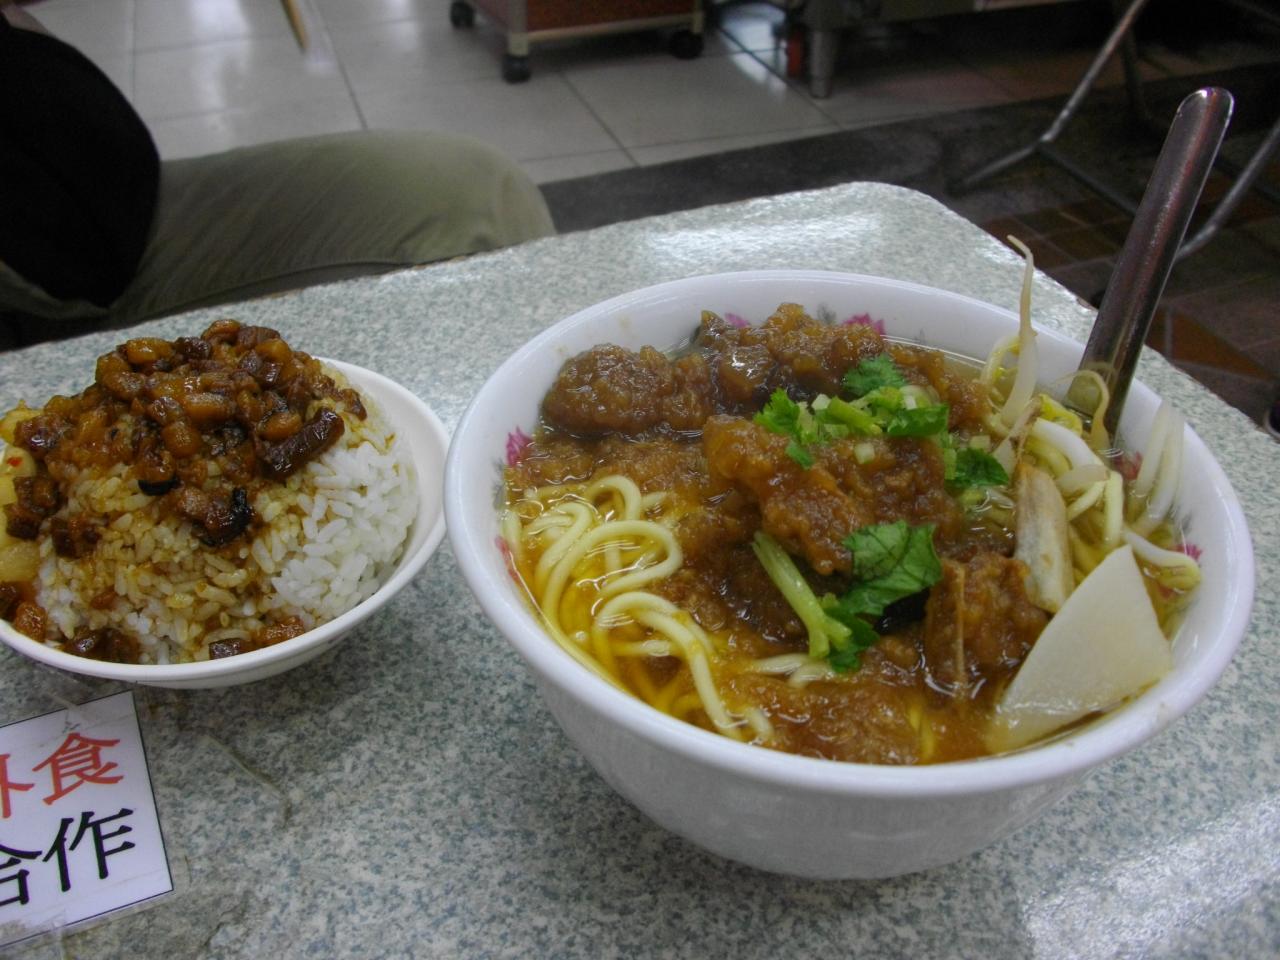 an asian food dish and bowl are pictured on a countertop